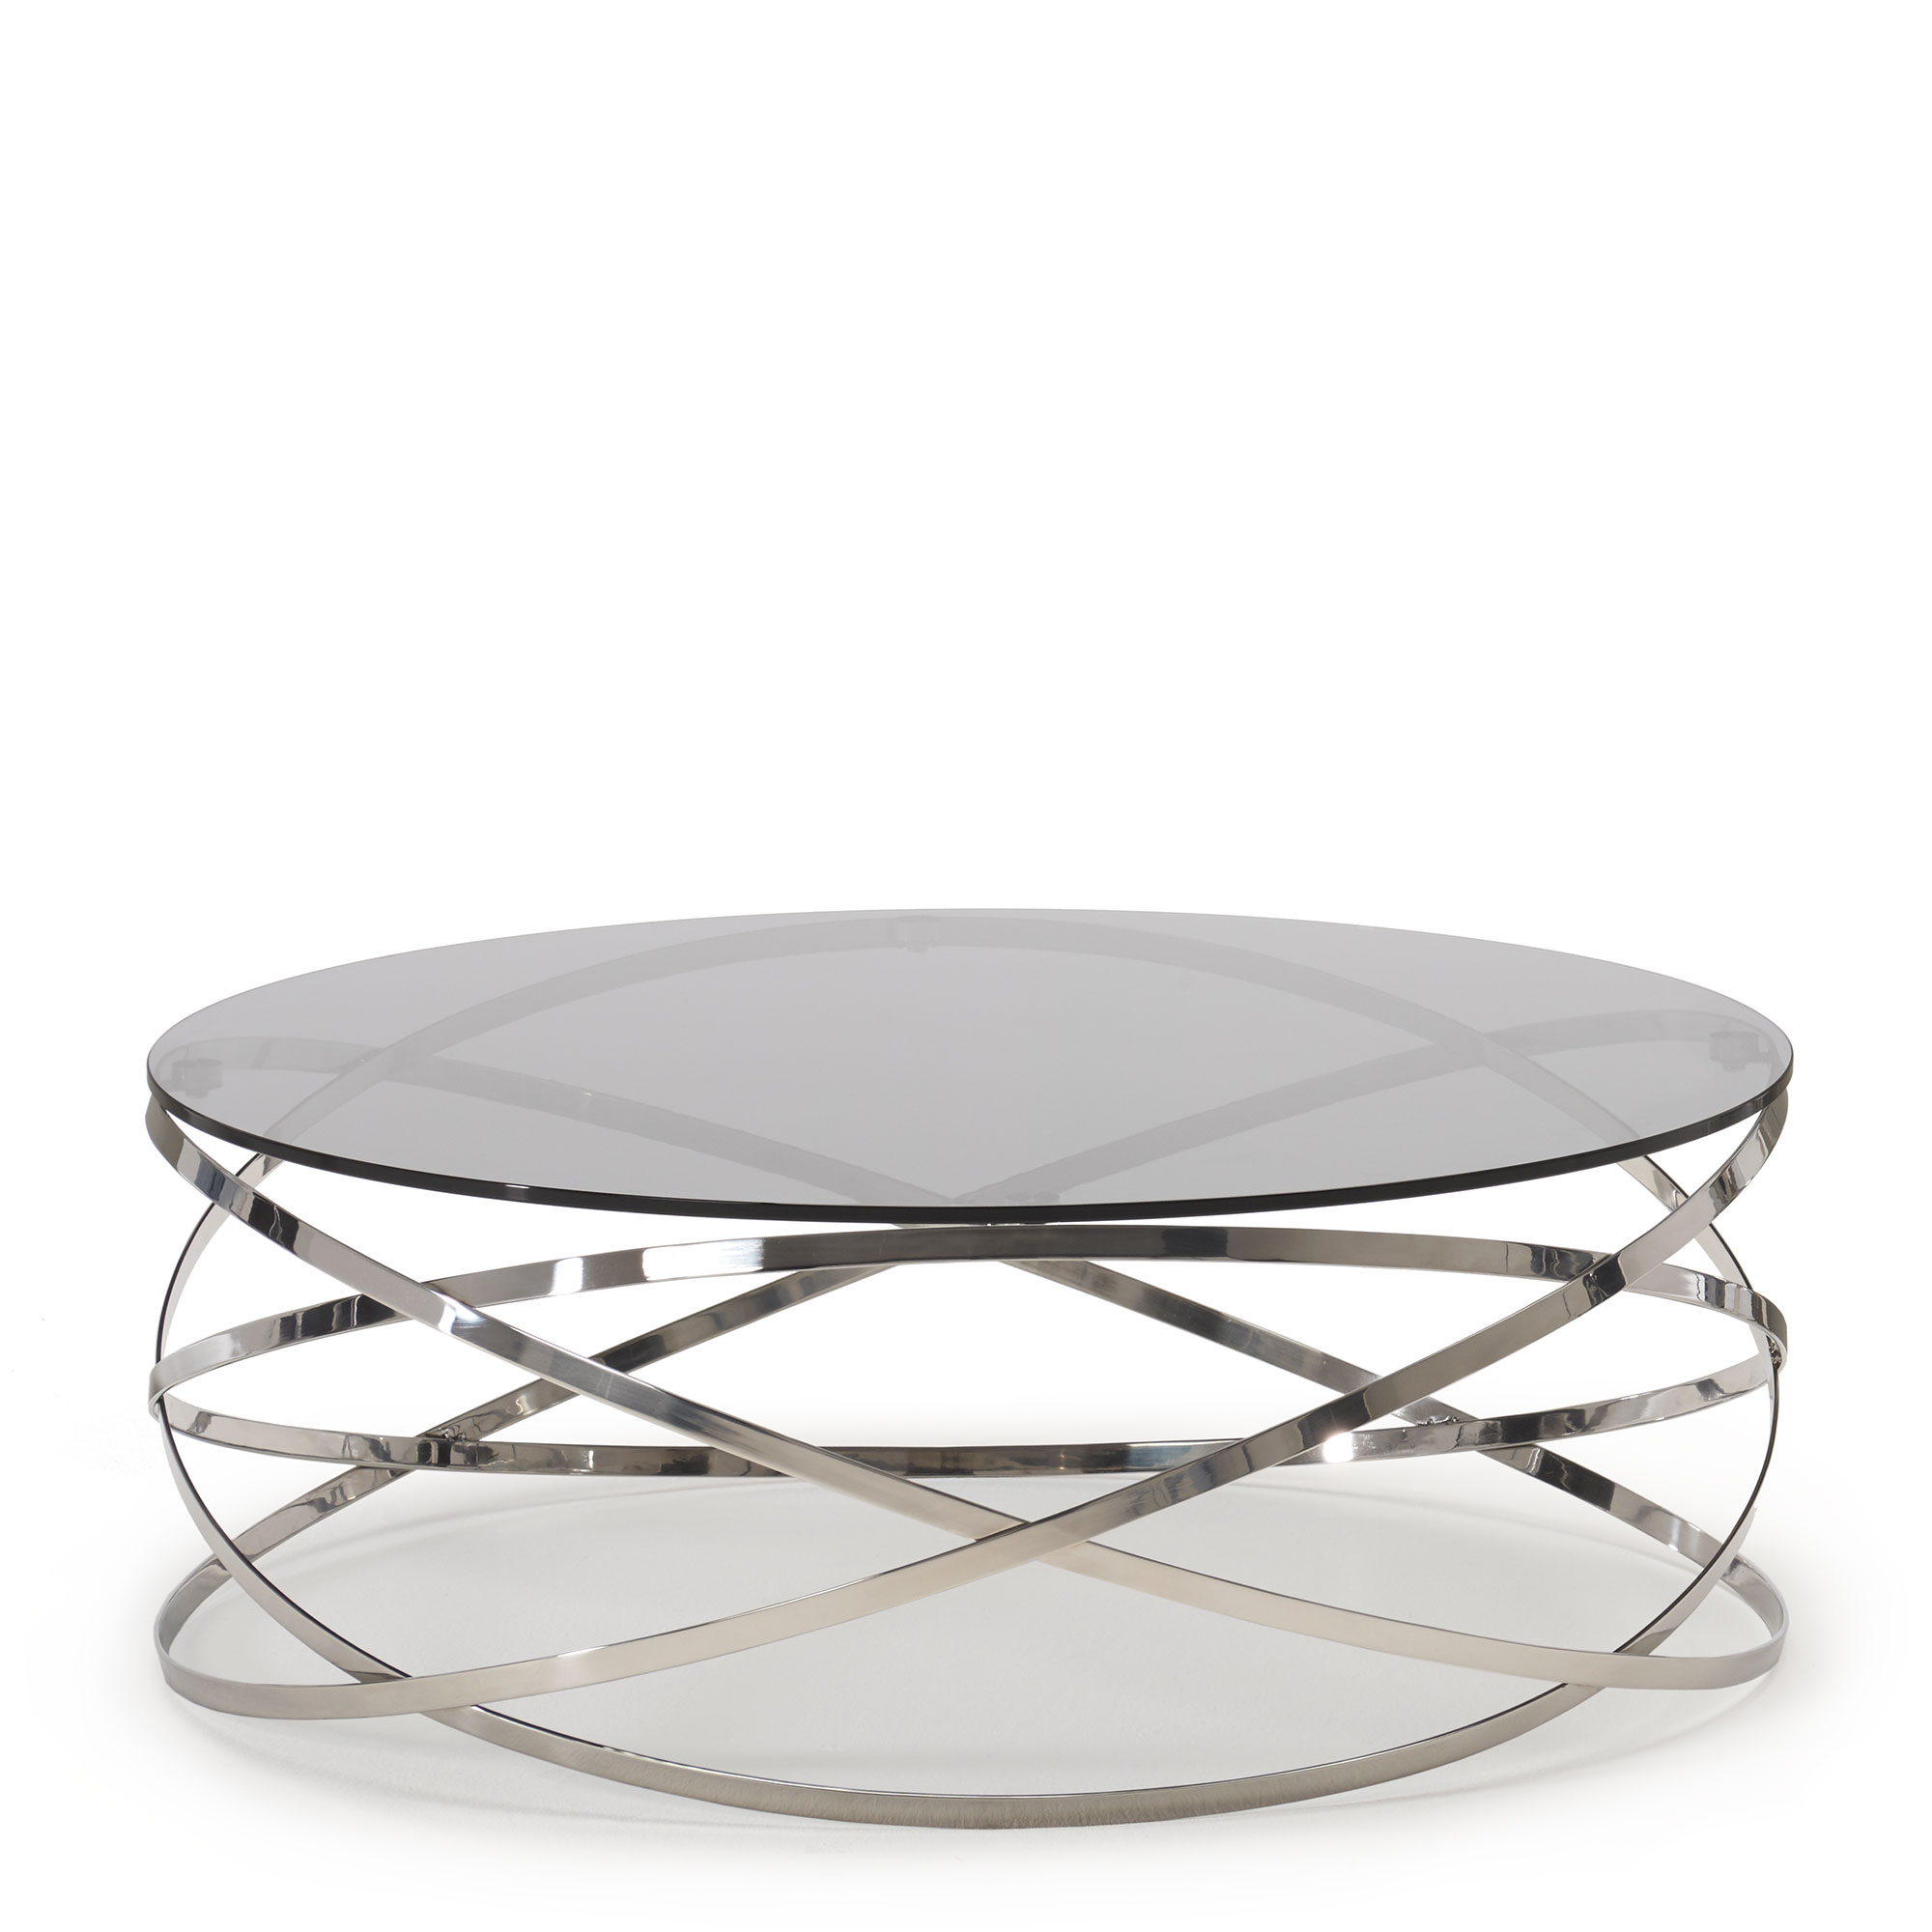 Renata Coffee Table With Grey Glass Top Stainless Steel Base Occasional Tables Fishpools